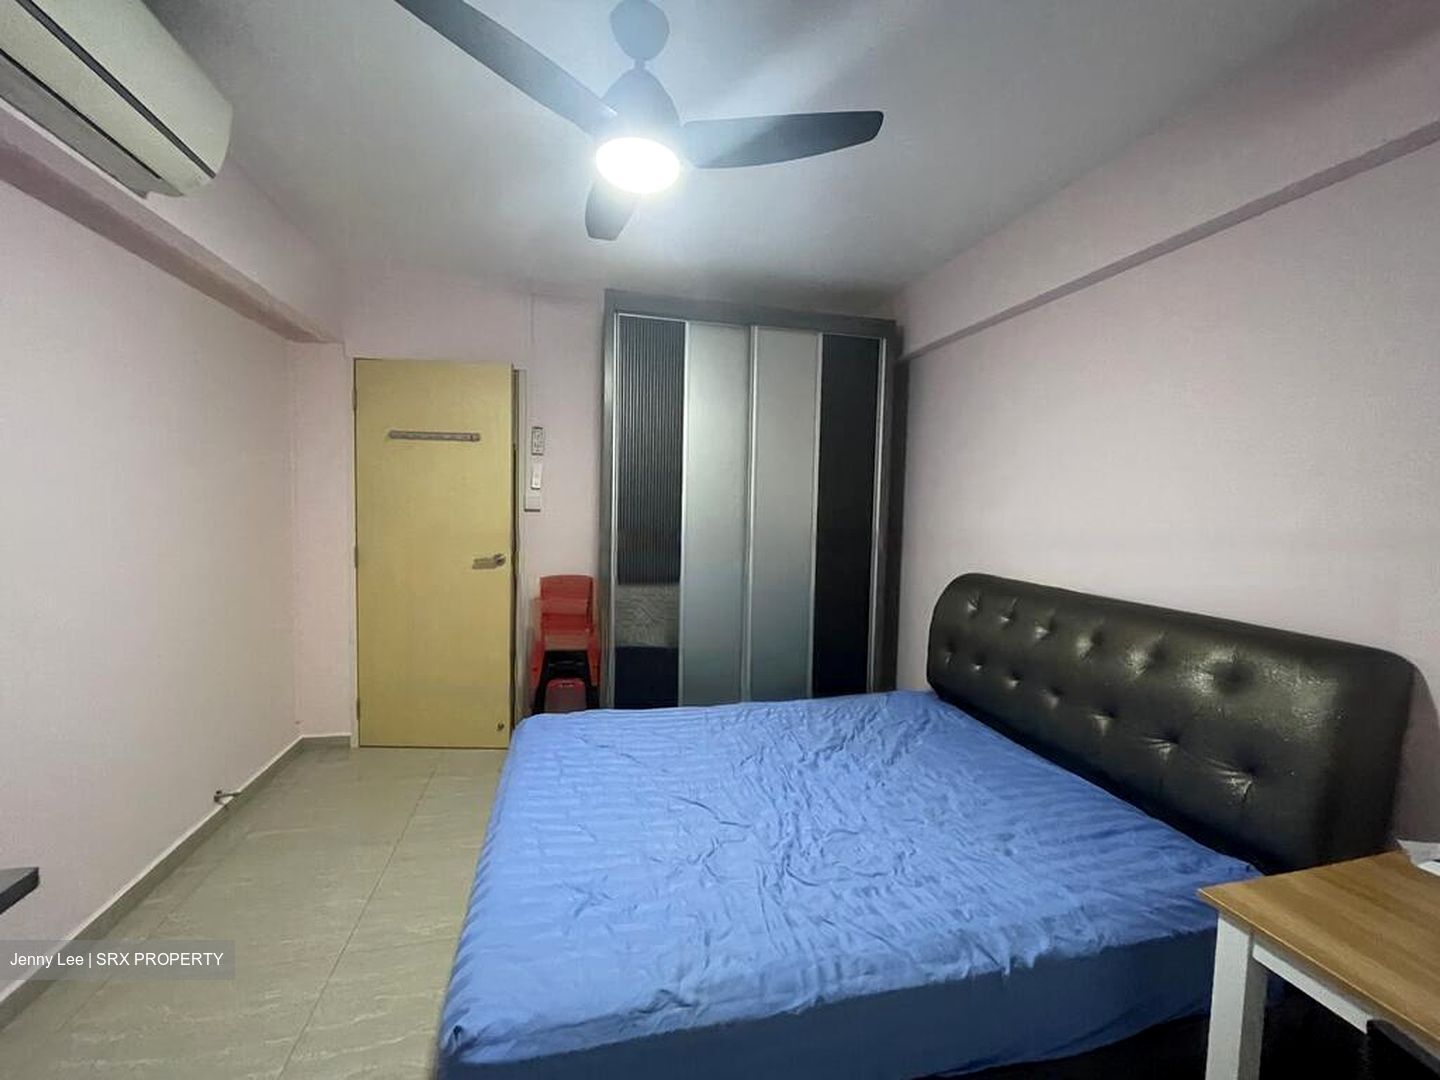 Blk 157 Yung Loh Road (Jurong West), HDB 4 Rooms #430222201